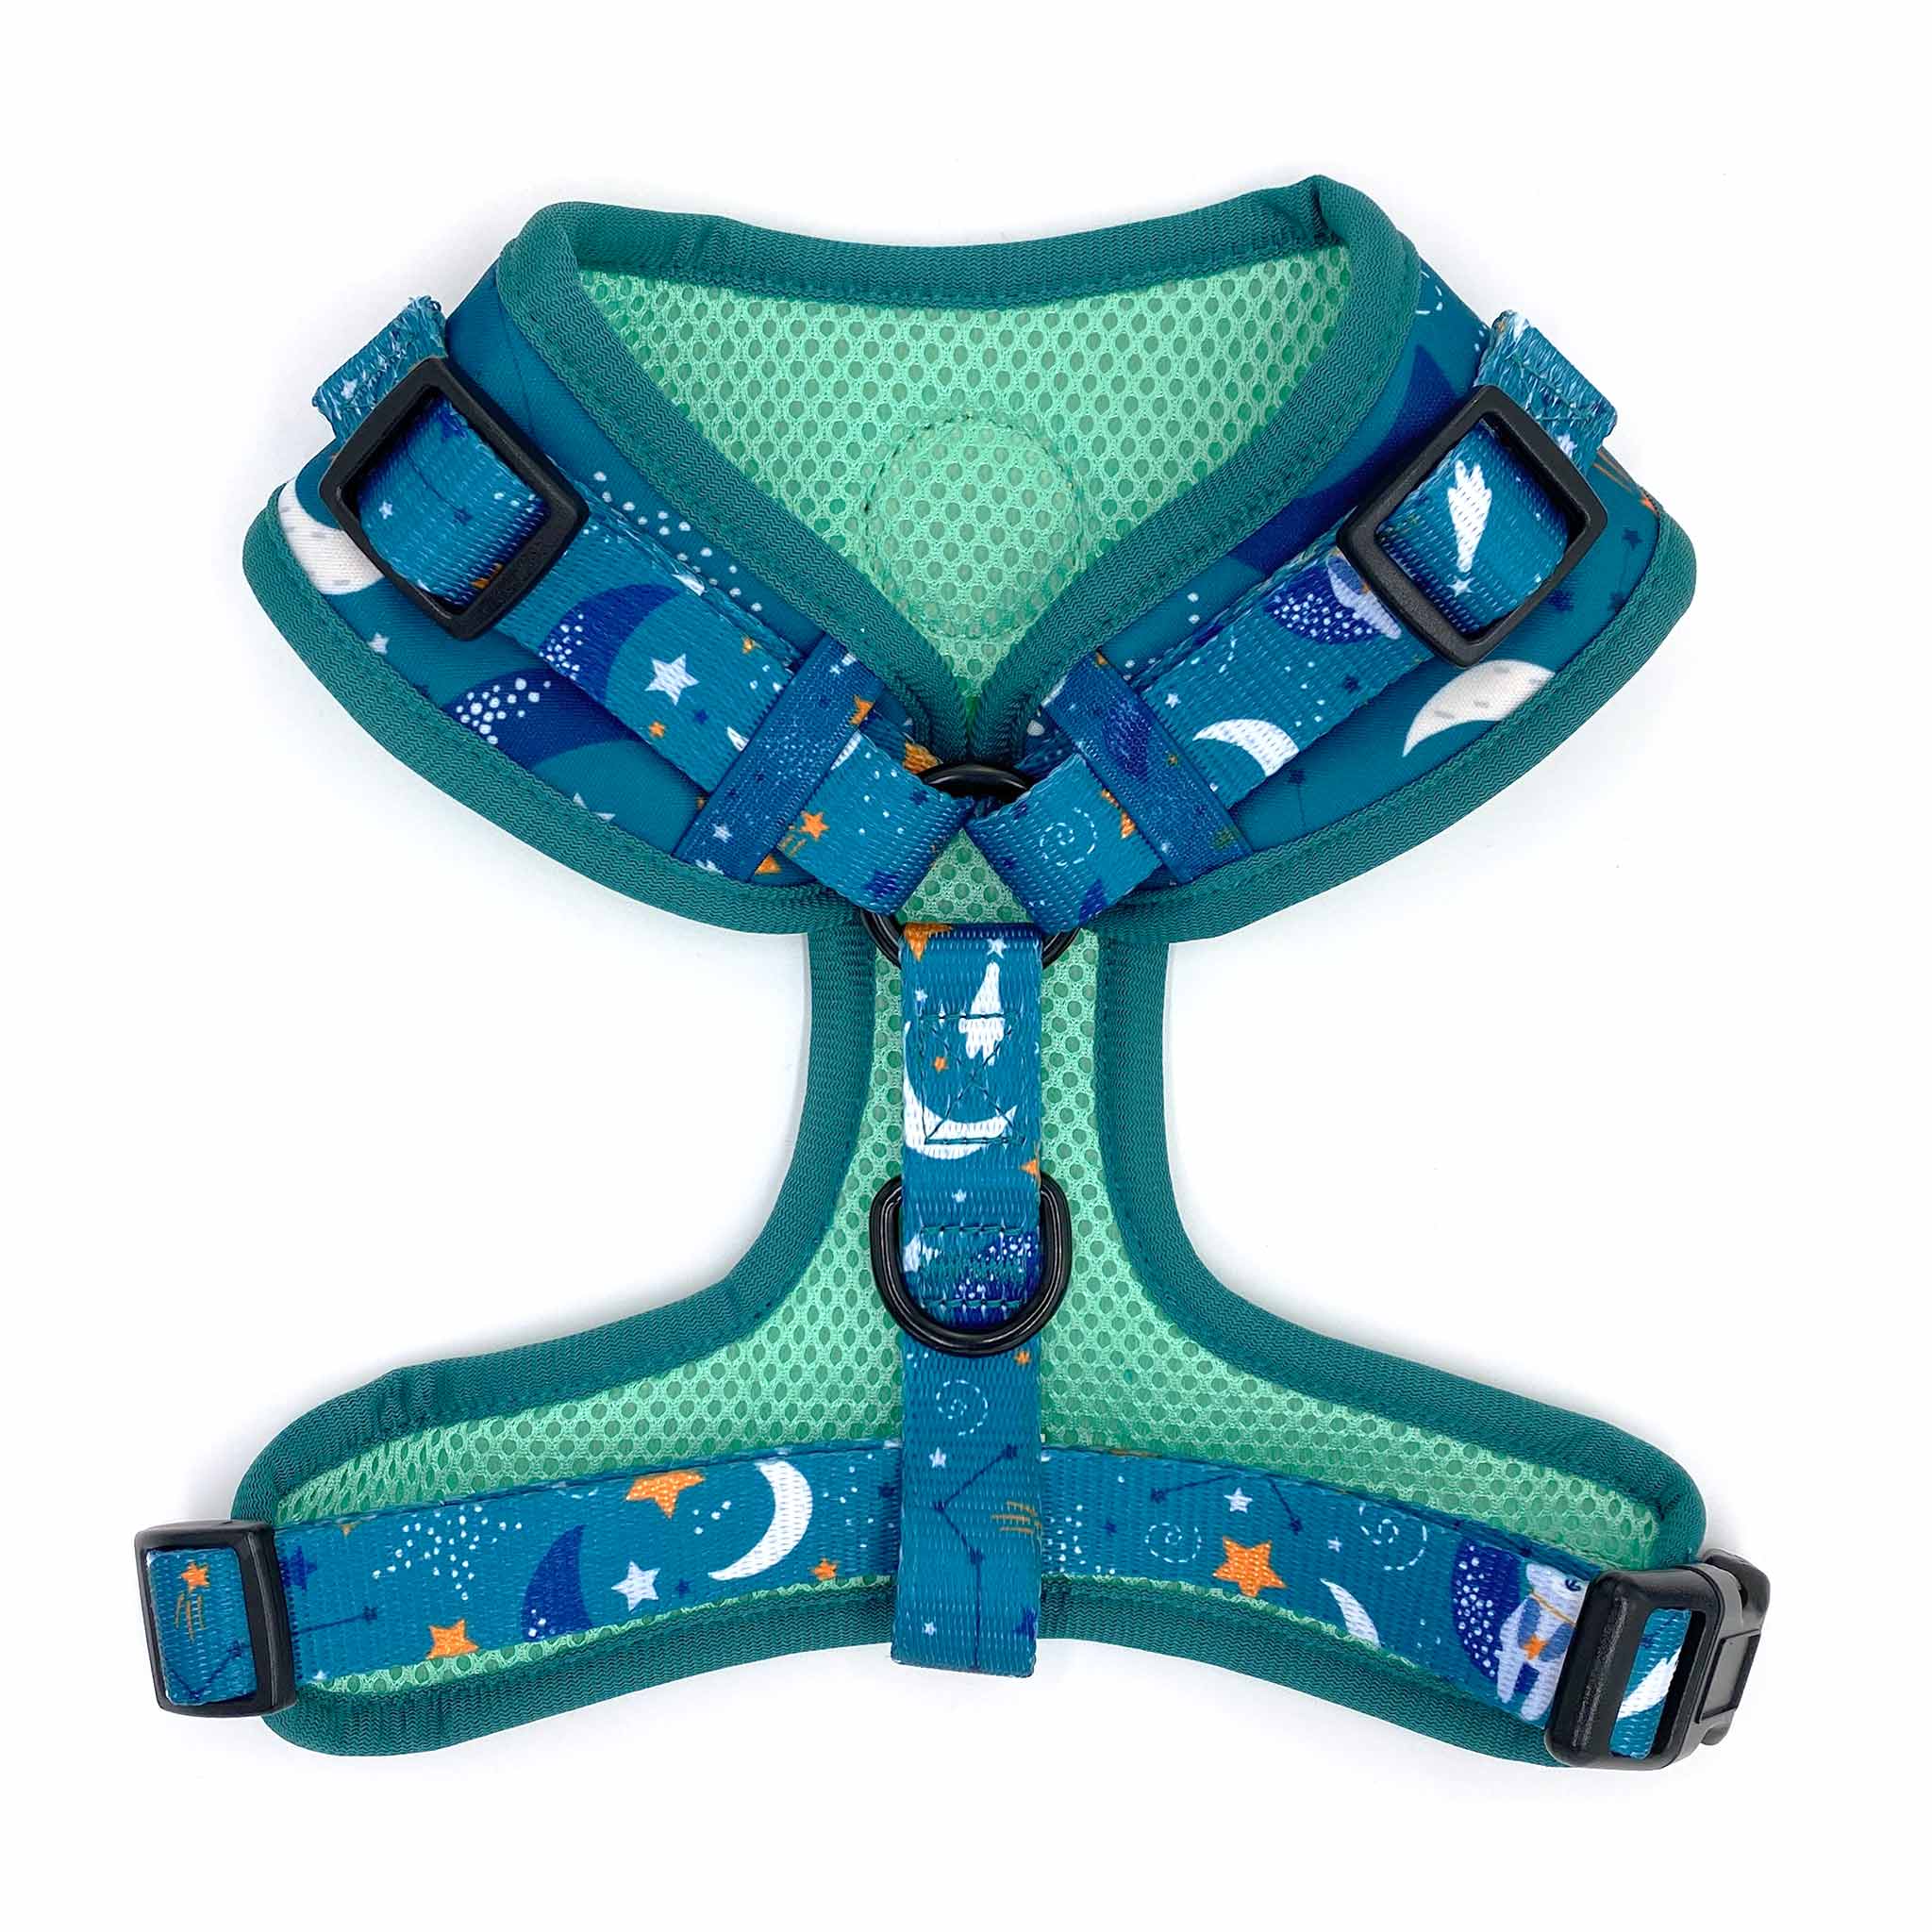 Back view of Pipco Pets adjustable dog harness with Starry Night outer space and stars print pattern in teal  Edit alt text